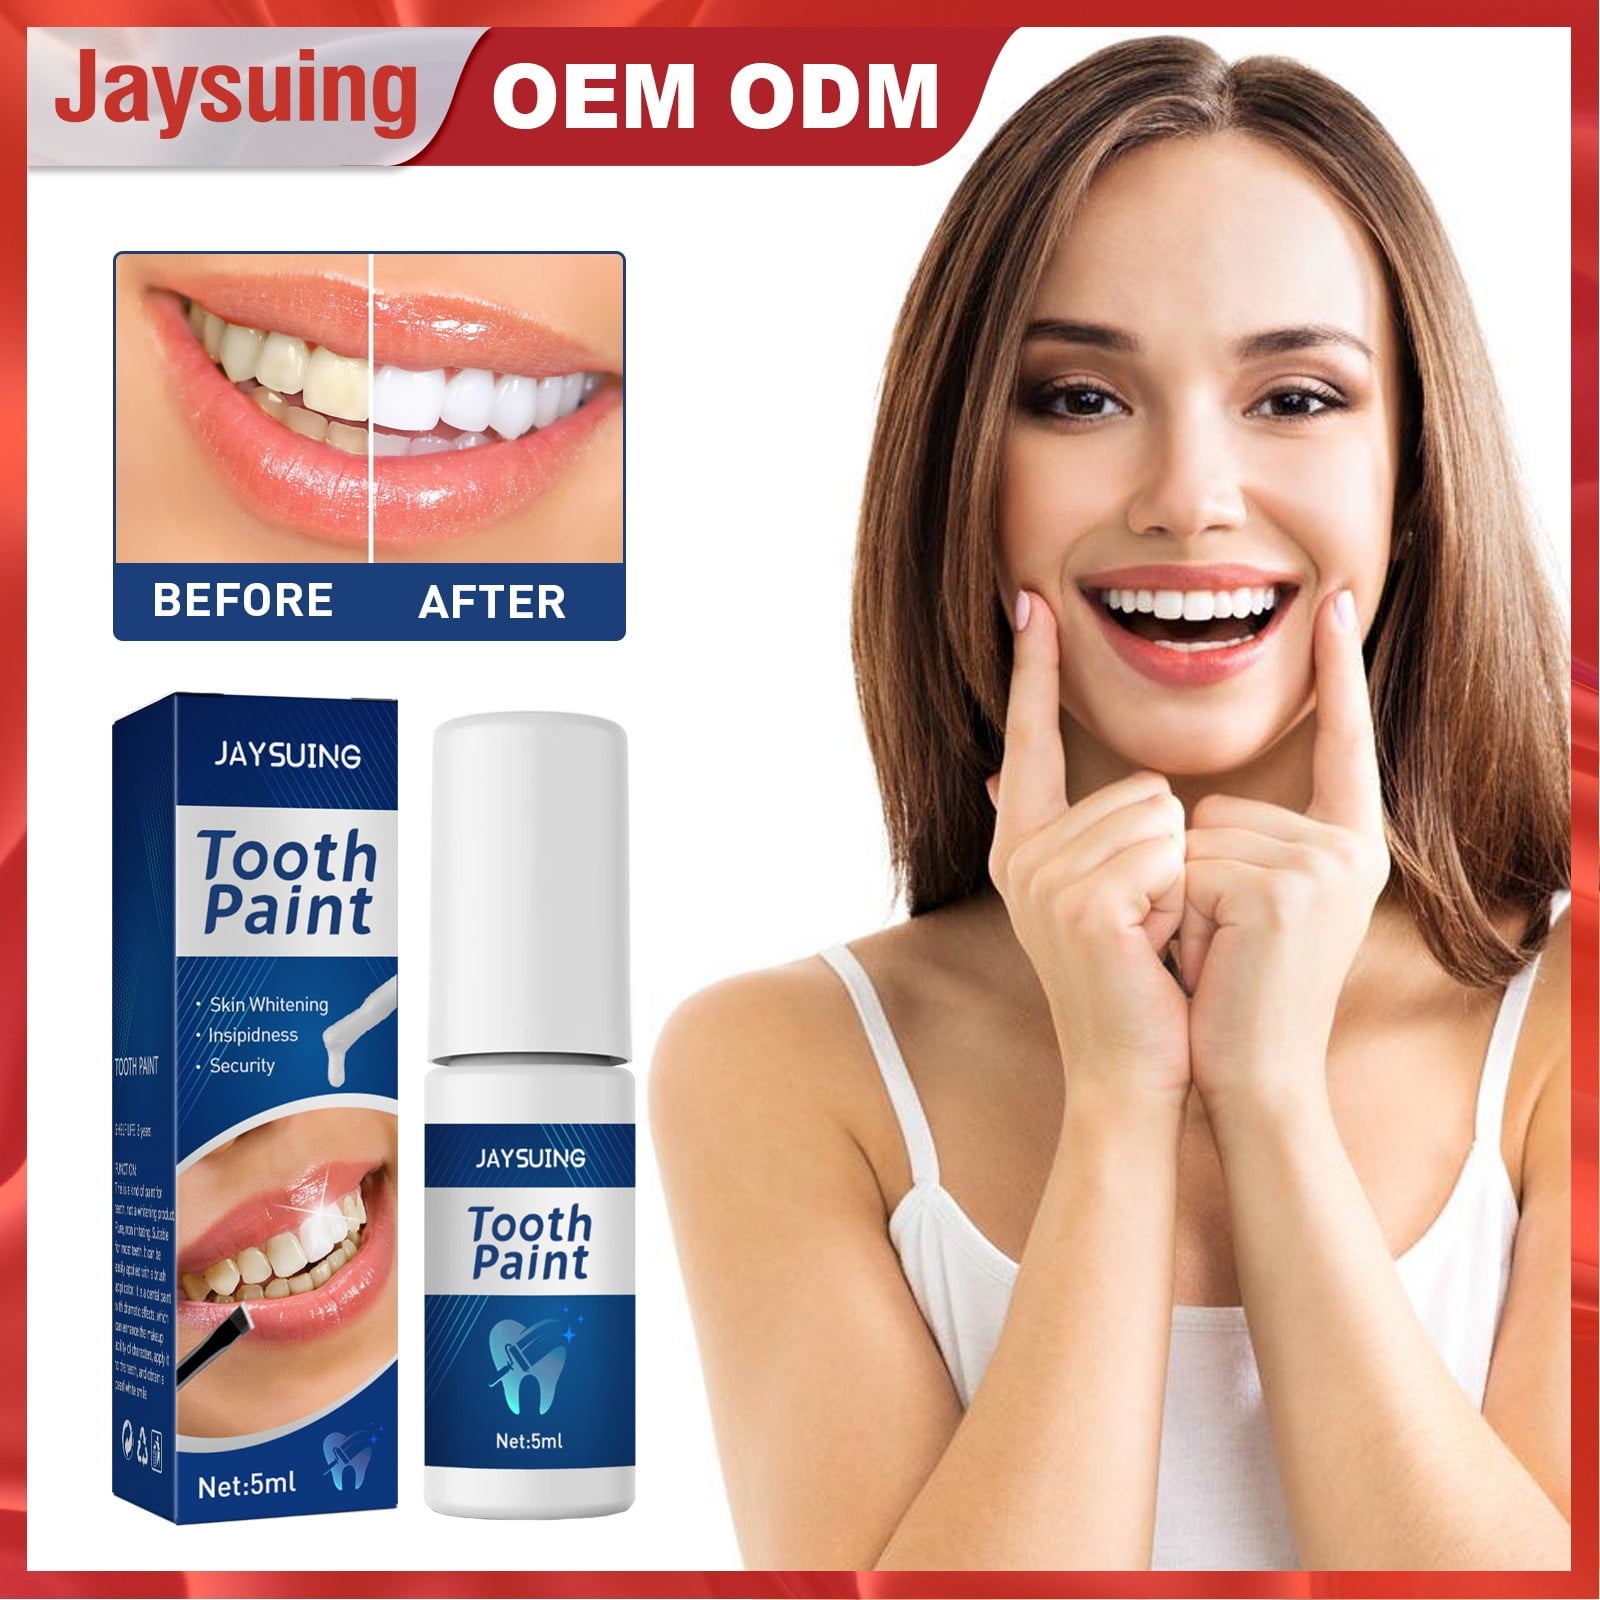 Opa type Slordig 3× Teeth Whitening Oral Gel Polish Pen Bleaching Dental Tooth Care Whitener  Tool | Teeth Whitening Paint Tooth Cleaning White Teeth Remove Plaque  Stains Whitener Bleach Oral Hygiene Tools Beauty Tooth Paint 